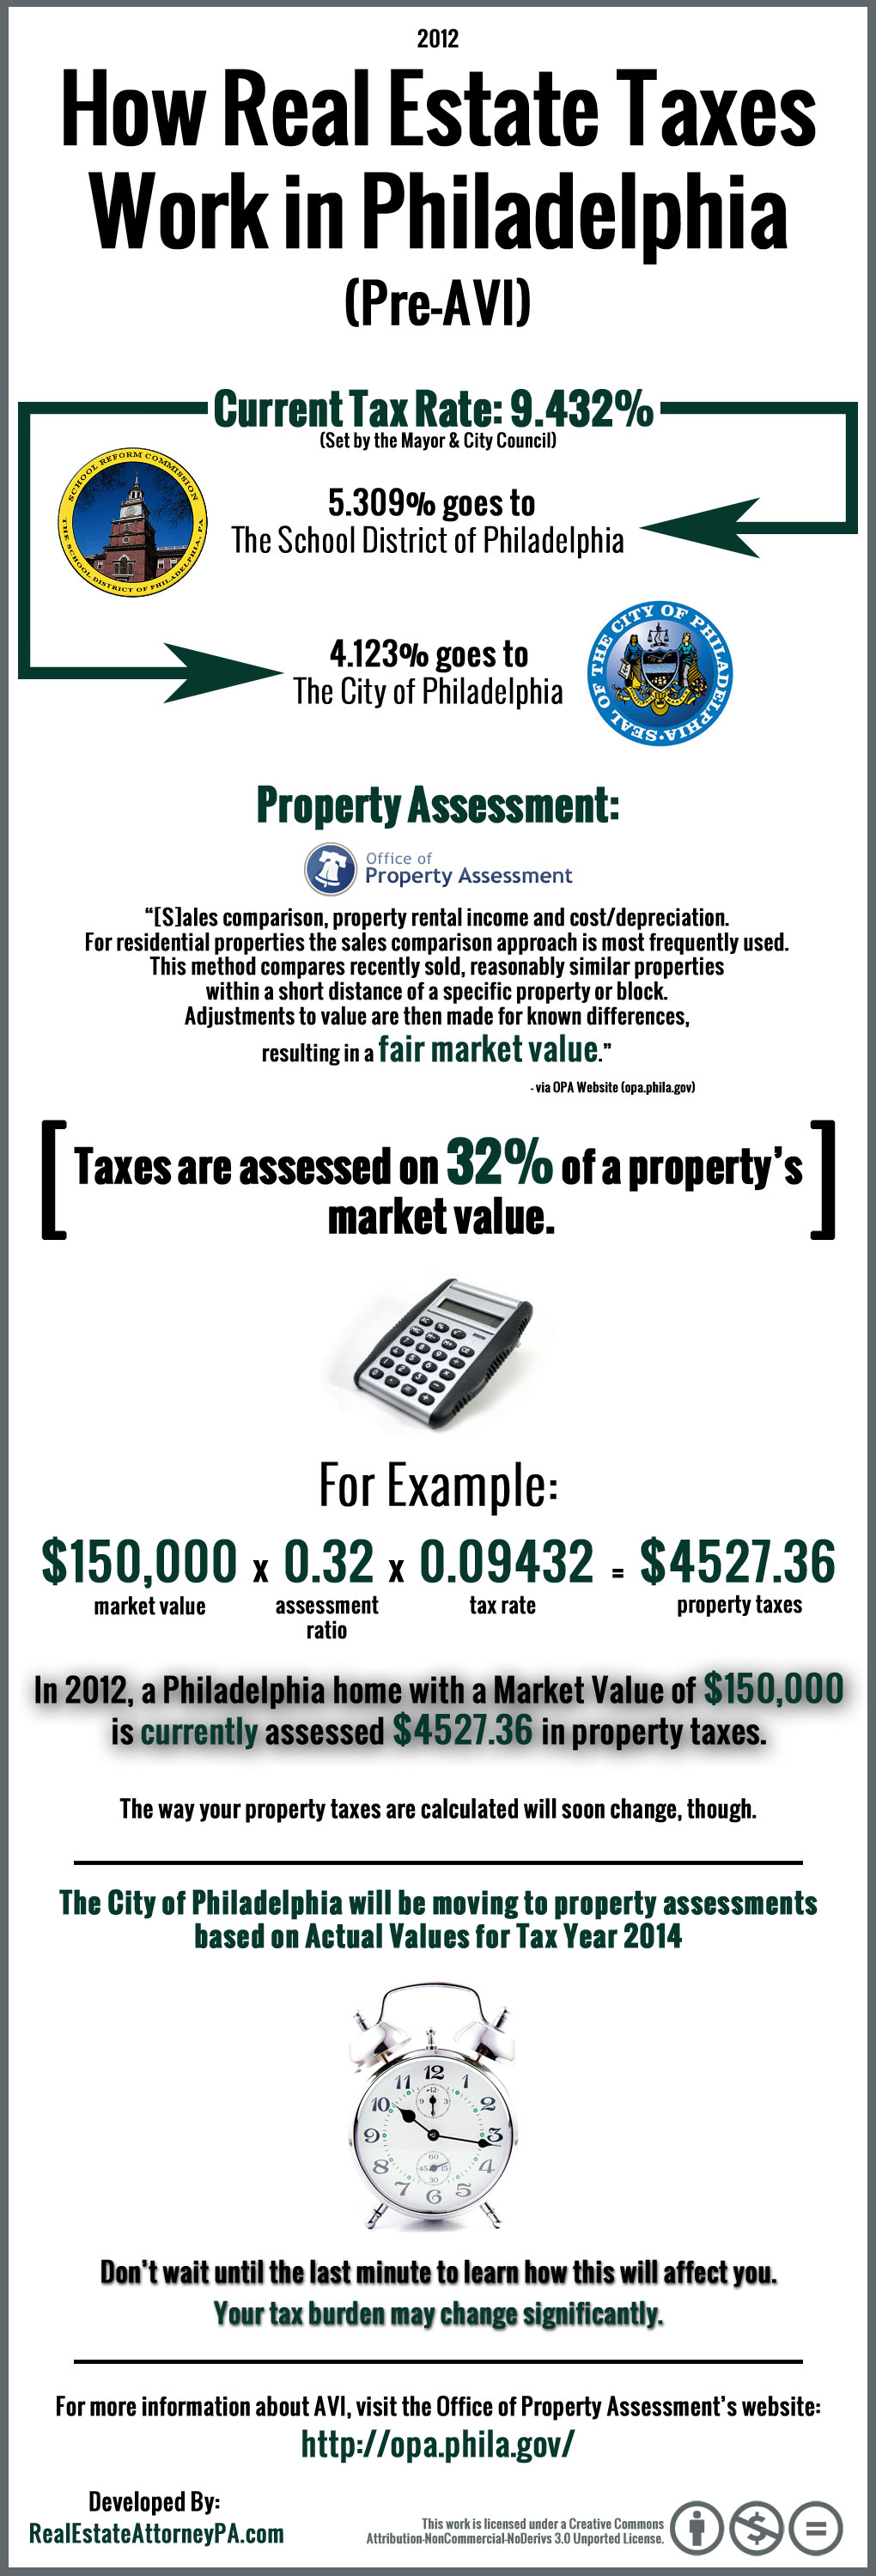 How Real Estate Taxes Work in Philadelphia (PreAVI) Visual.ly